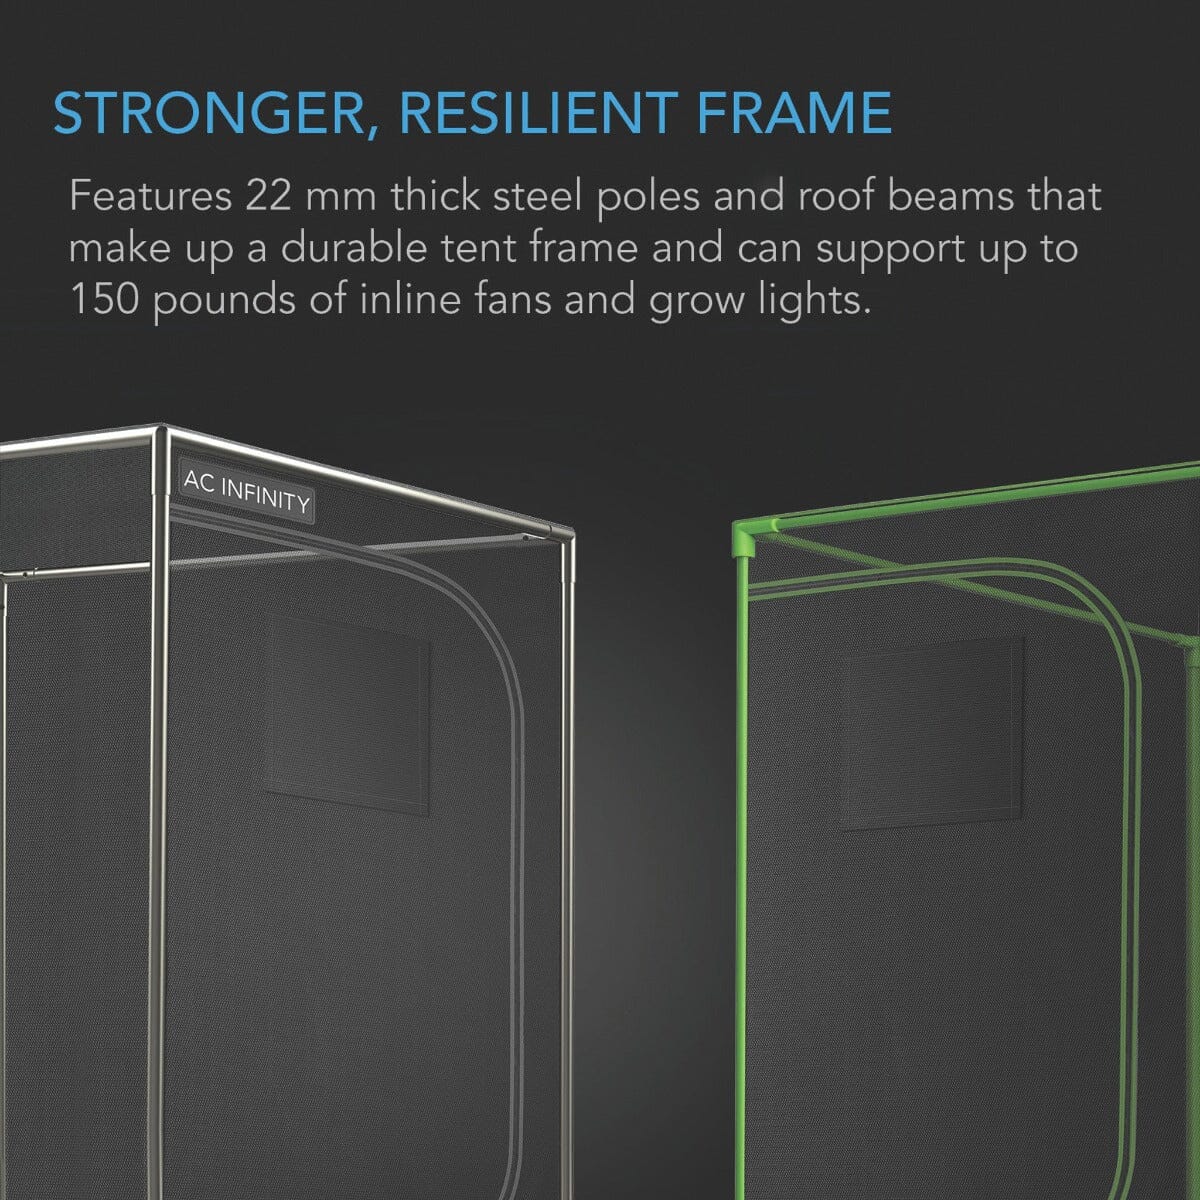 Cloudlab tents, stronger and more resilient frame